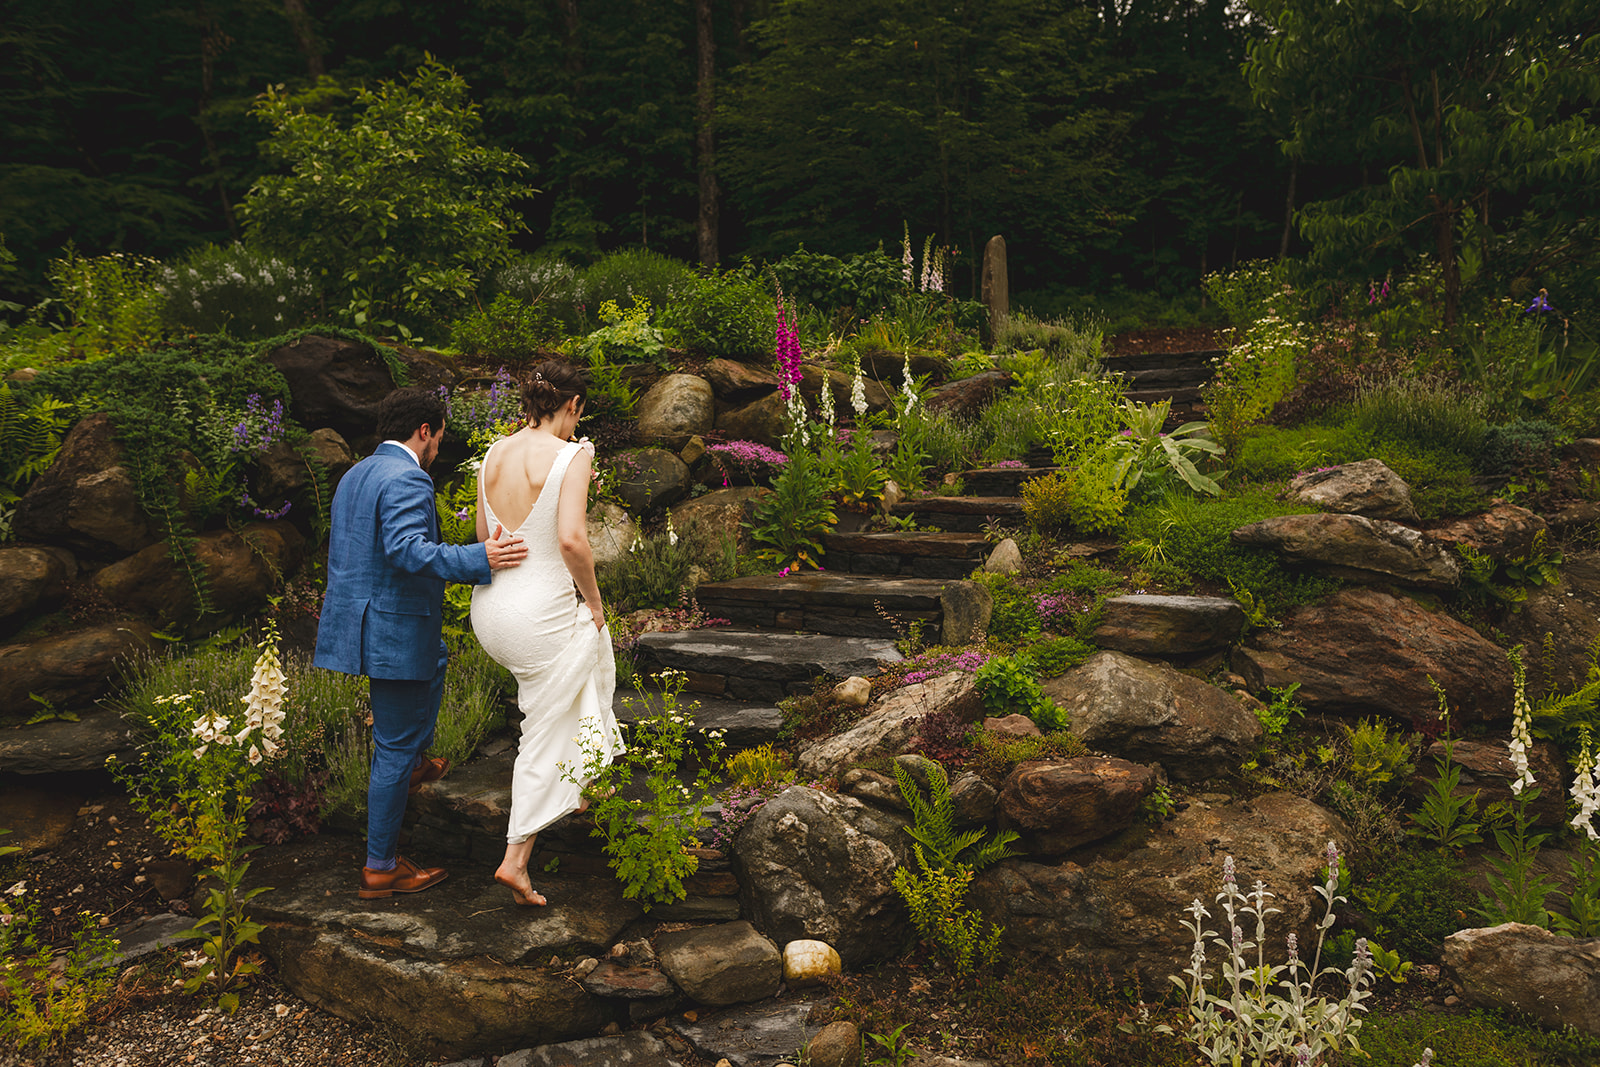 a barefoot bride in a white dress and her groom in a blue suit pose walk up stone steps in a garden  